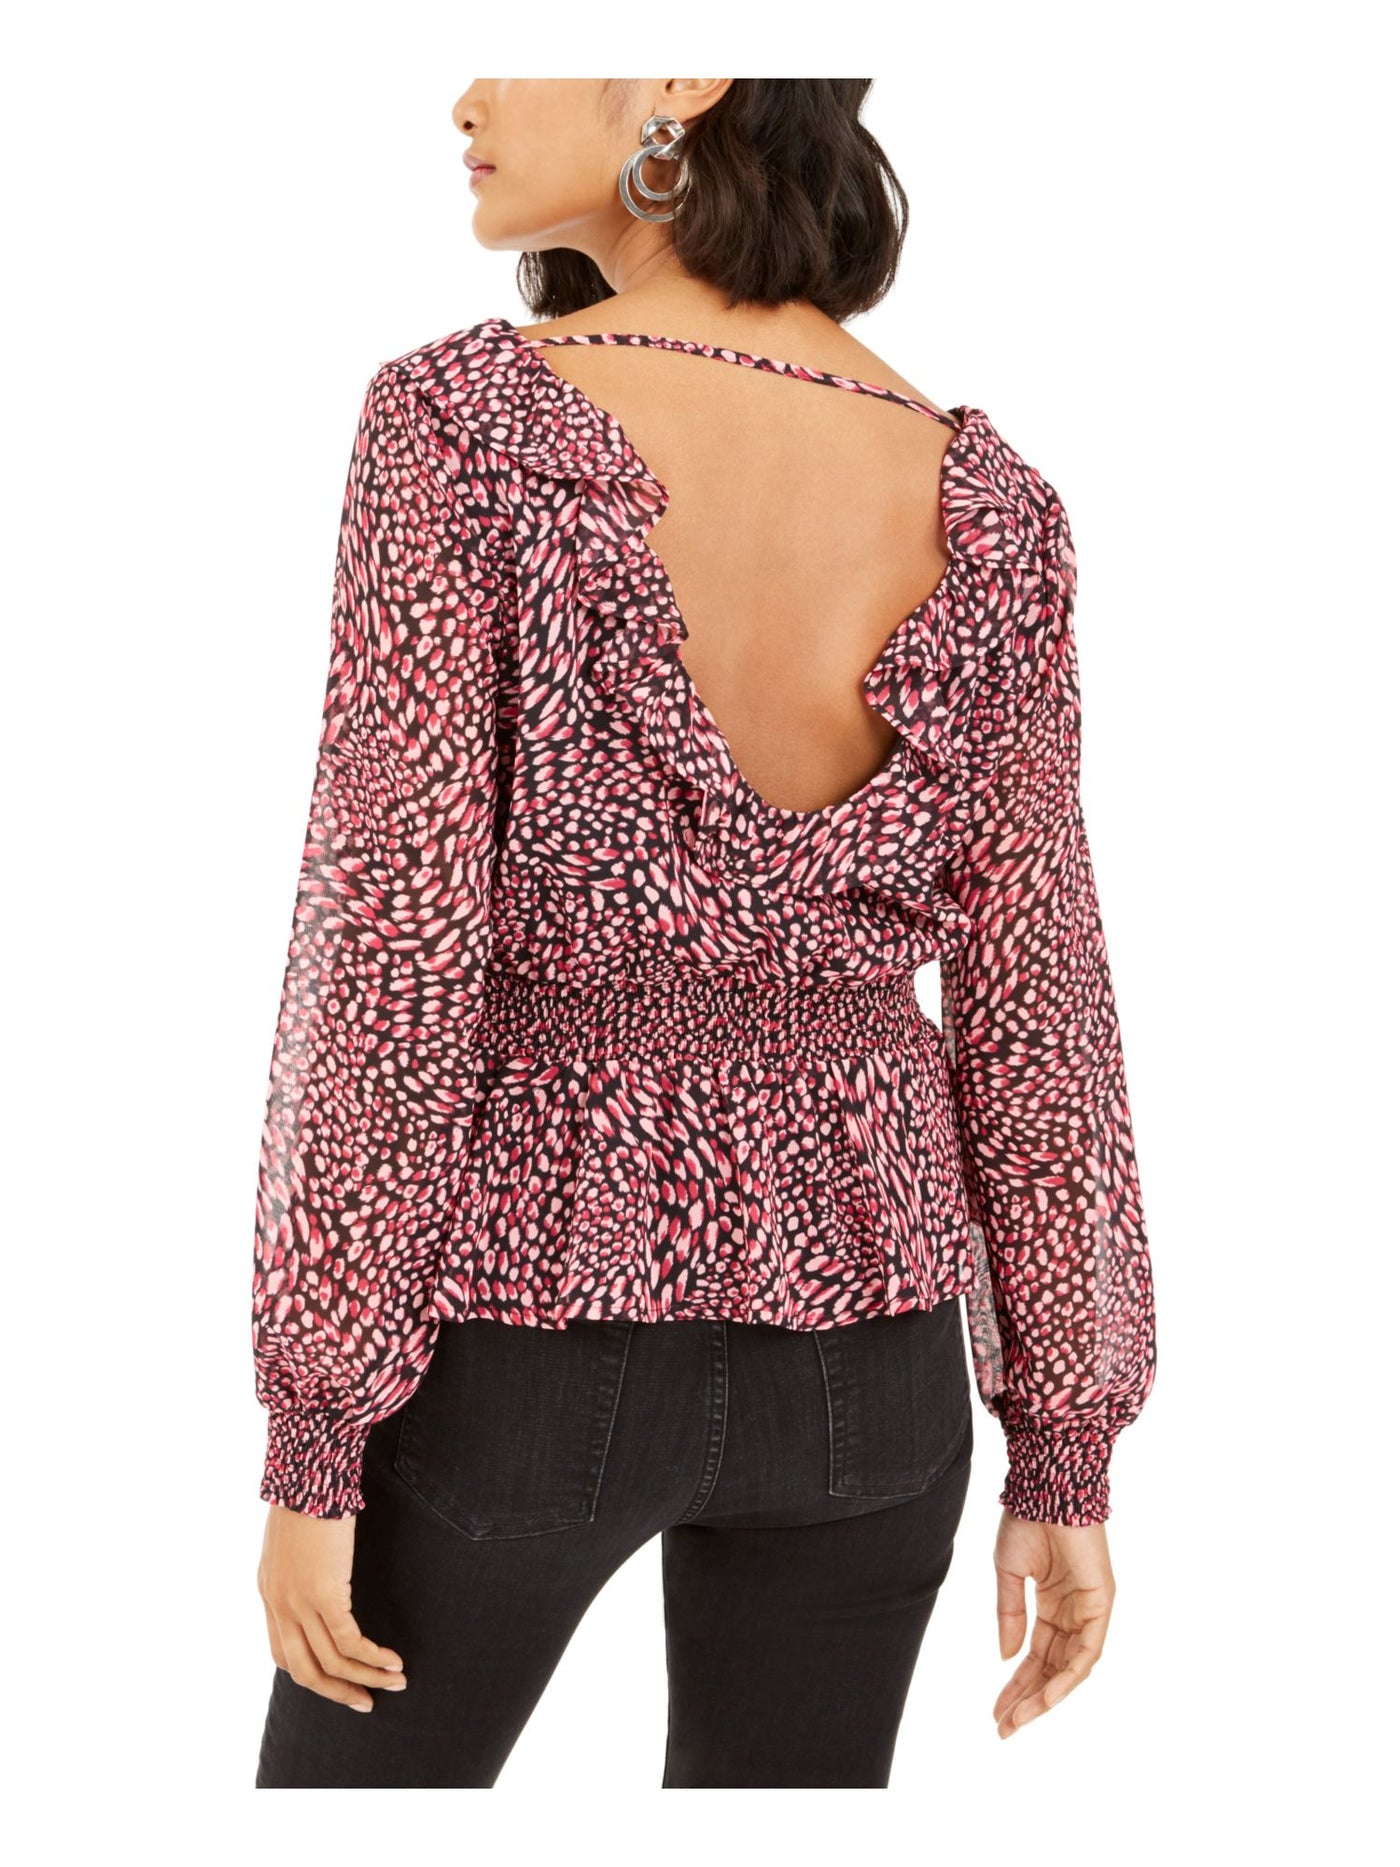 BAR III Womens Pink Ruffled Patterned Long Sleeve V Neck Top M